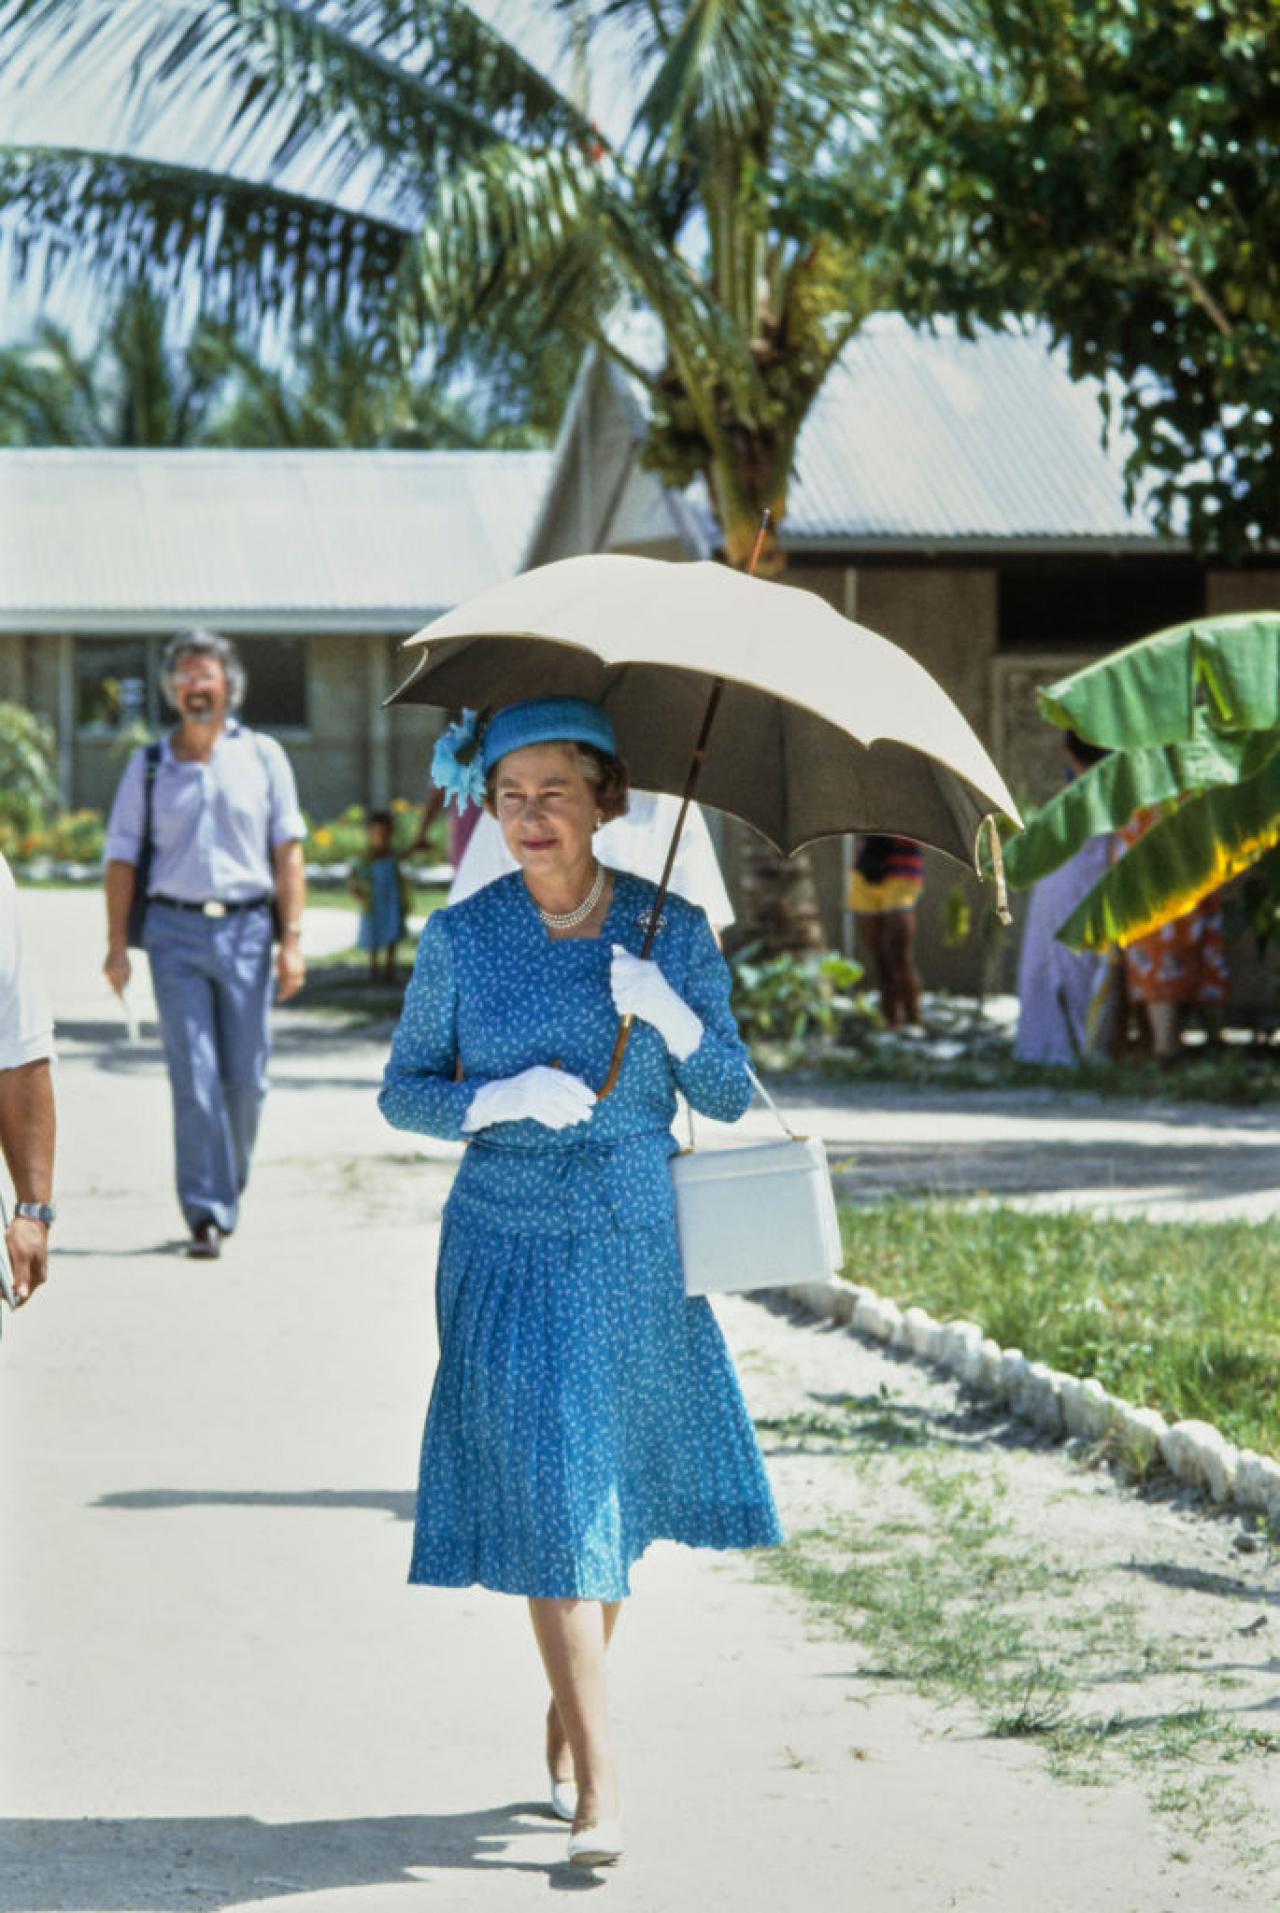 British Royal Queen Elizabeth II, wearing a blue two-piece outfit with white detail and a matching hat, shades herself beneath a parasol during a visit to the Princess Margaret Hospital in Fongafale, on the South Pacific of Tuvalu, 27th October 1982. The visit was part of the Royal Tour of Australia and the Pacific Islands. (Photo by Tim Graham Photo Library via Getty Images)